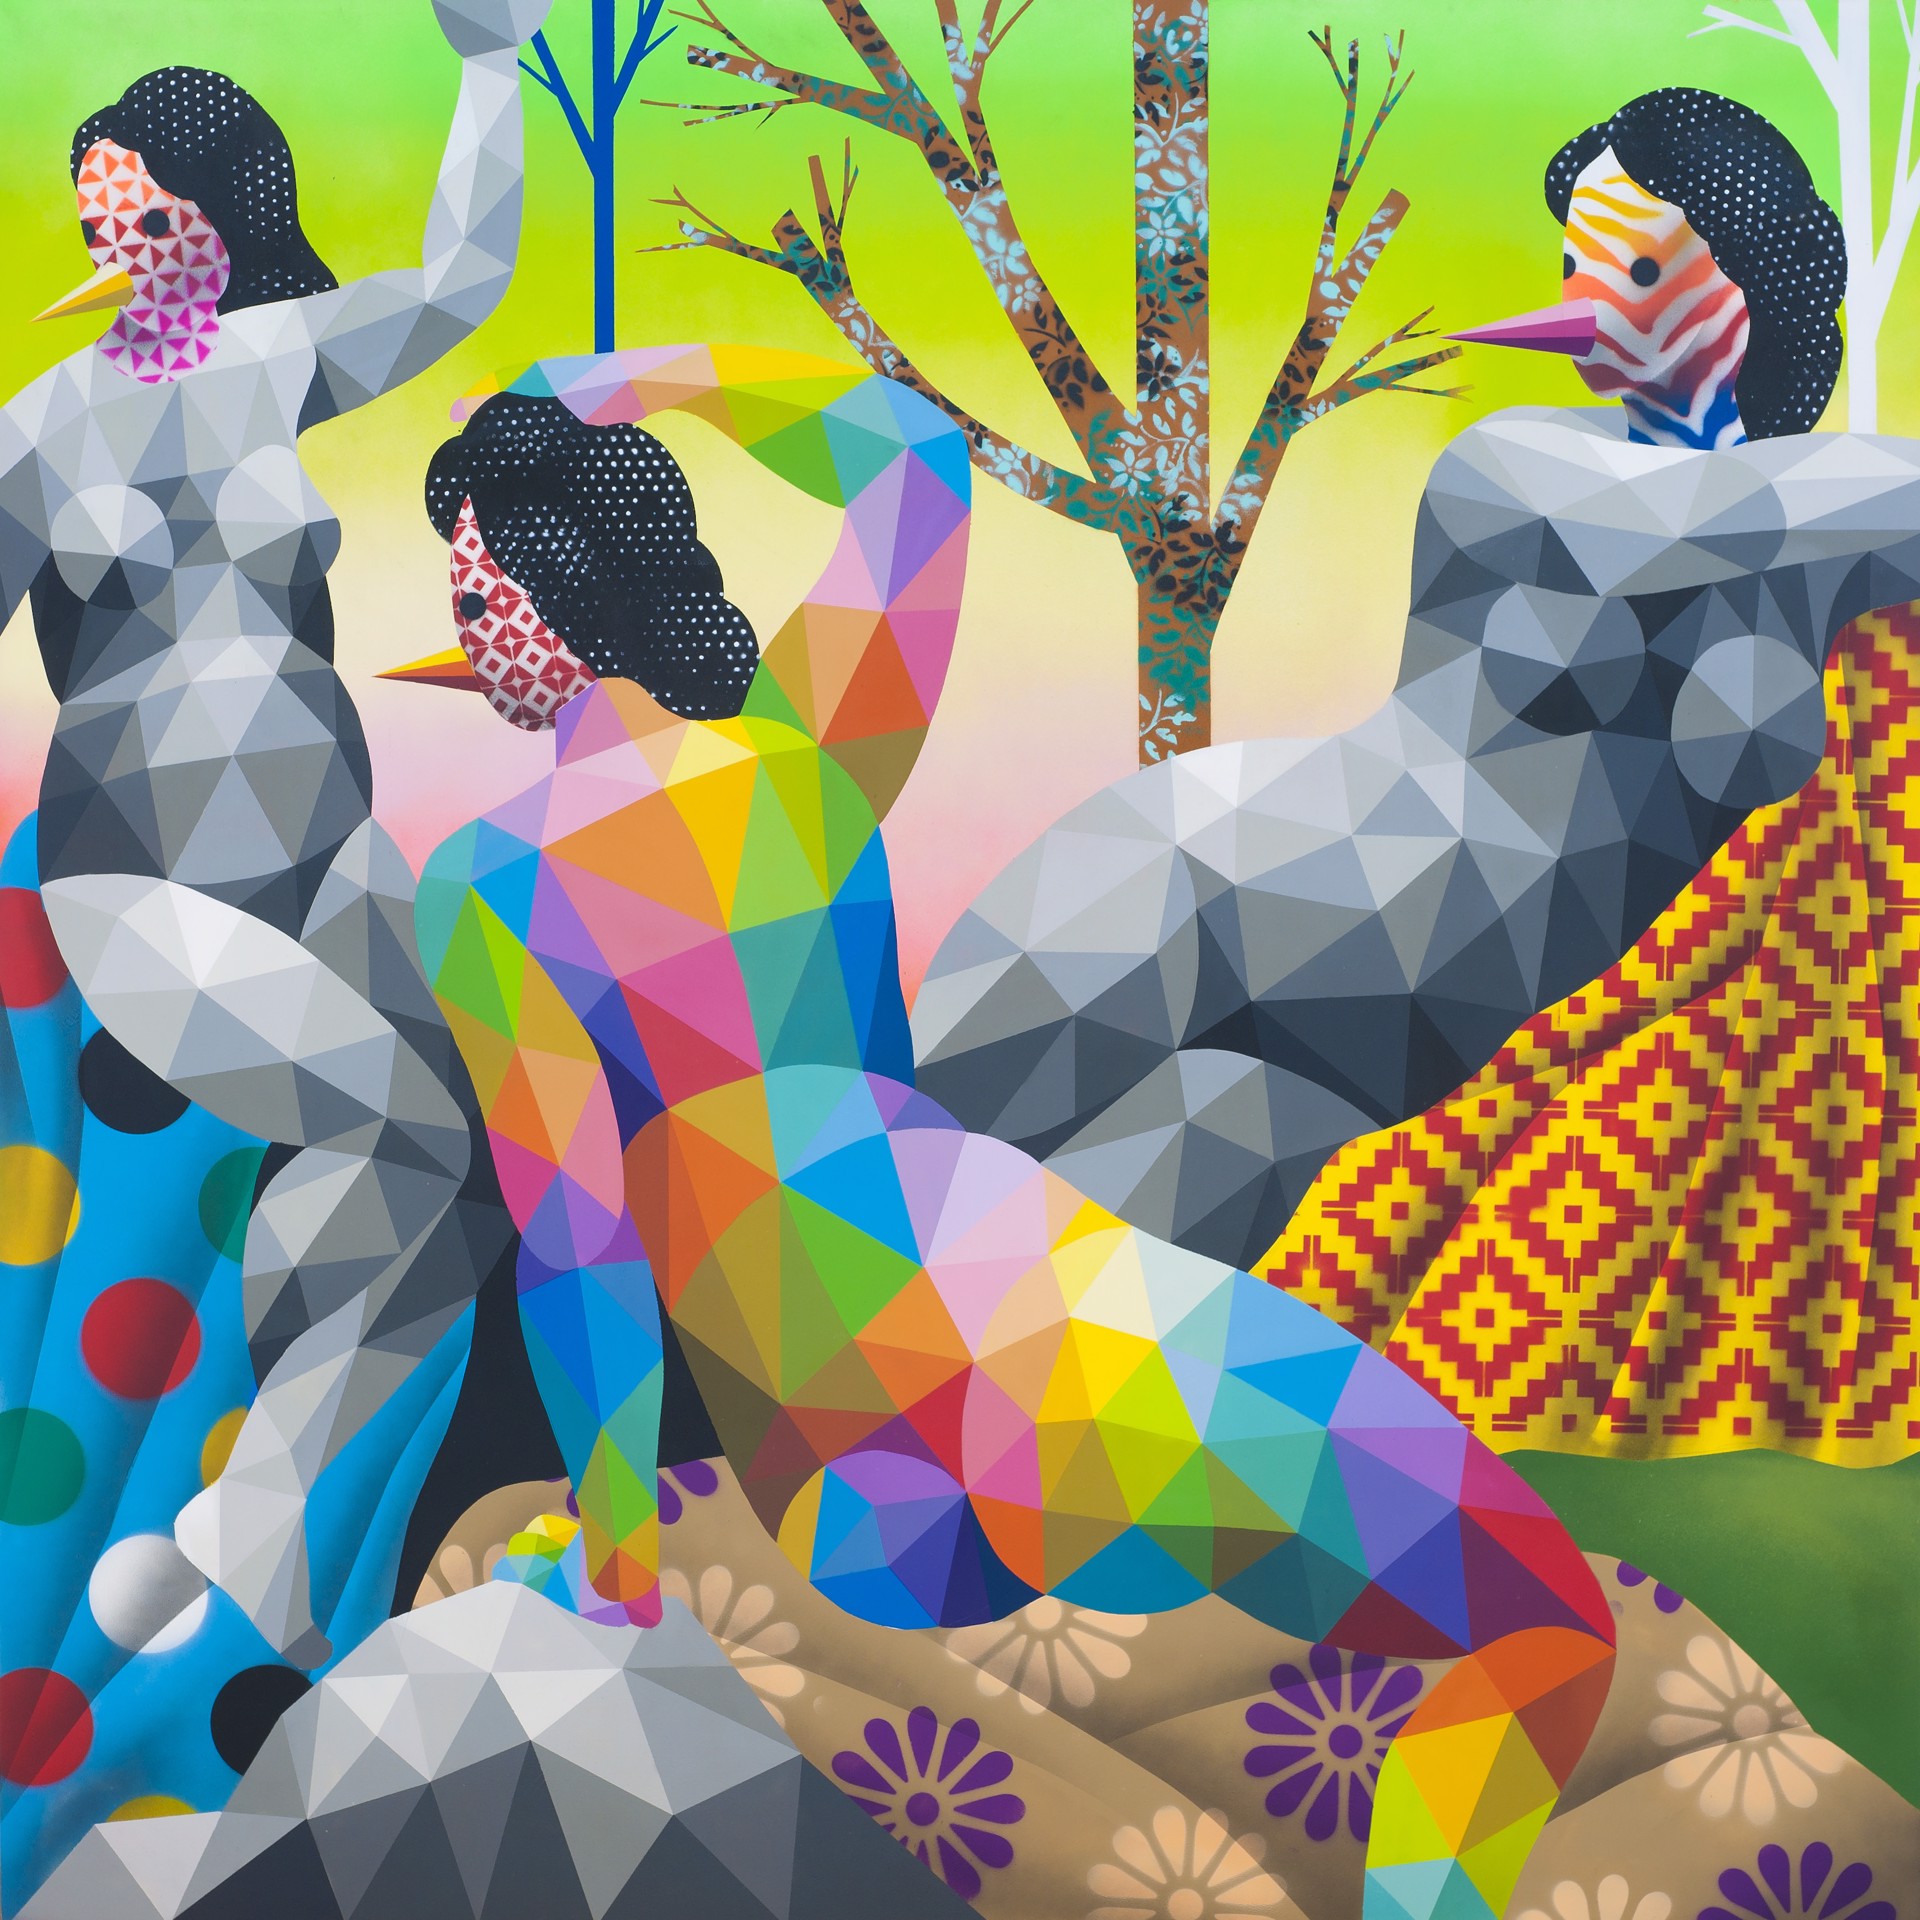 Graces Looking At The Horse by Okuda San Miguel